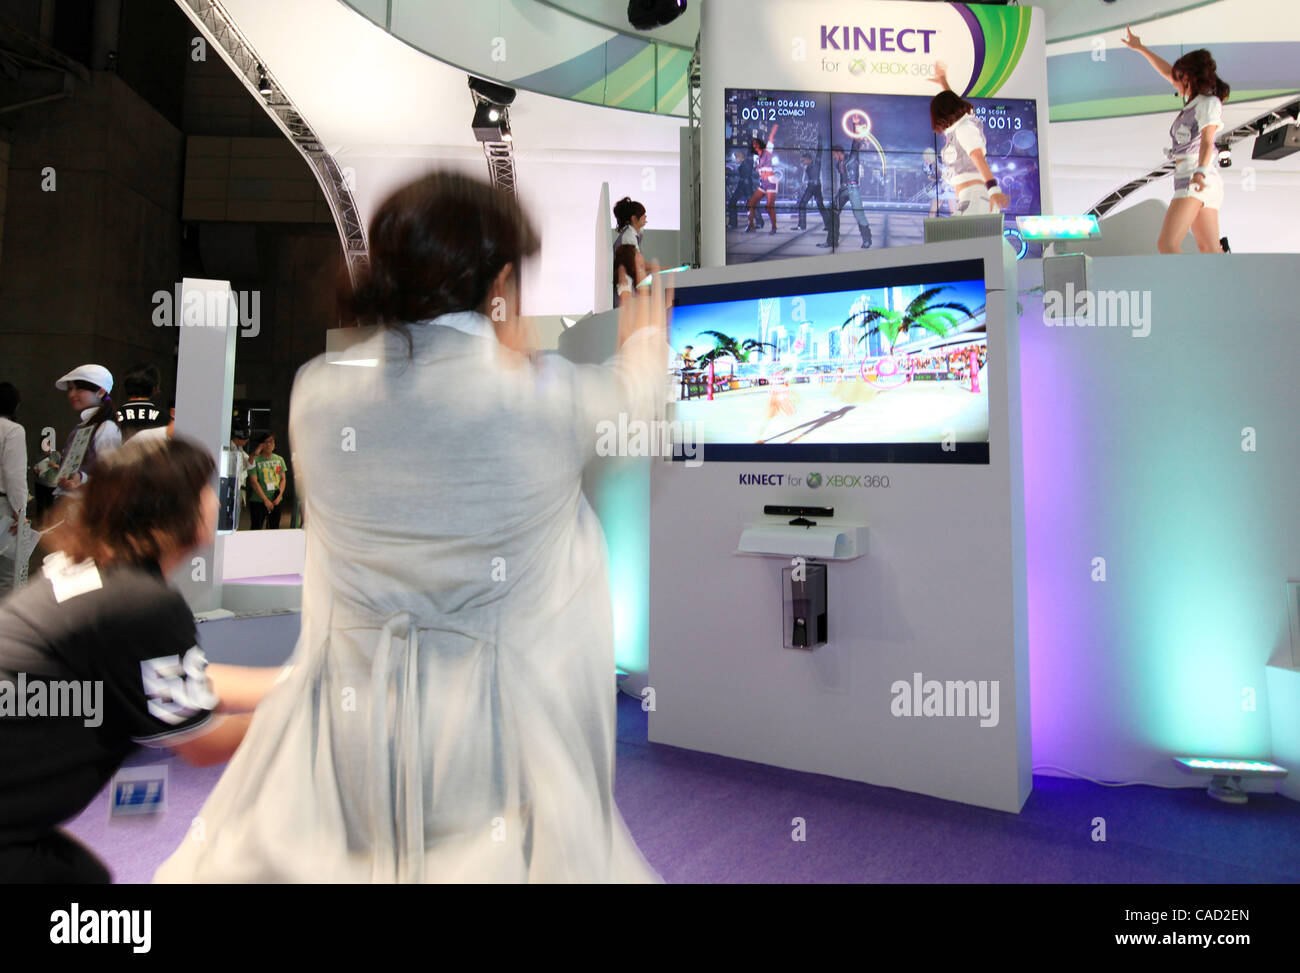 Sep 16, 2010 - Chiba, Japan - Visitors play games with Microsoft's new  Kinect game console for the Xbox 360 during the Tokyo Game Show 2010 in  Chiba City, Japan. 194 companies